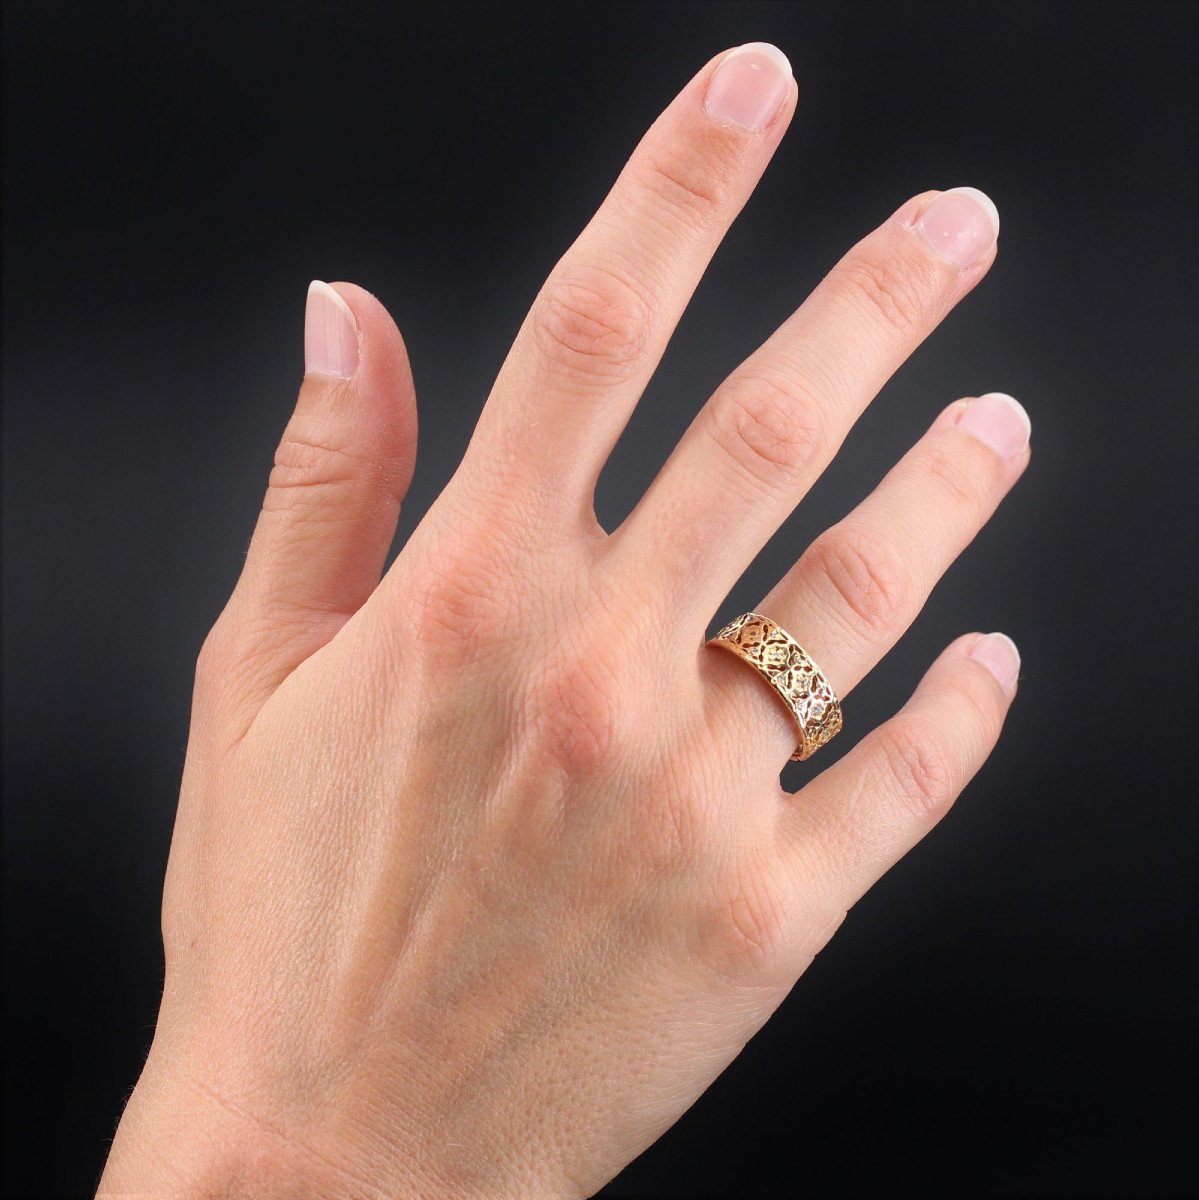 Old Ring In Gold And Diamonds-photo-1